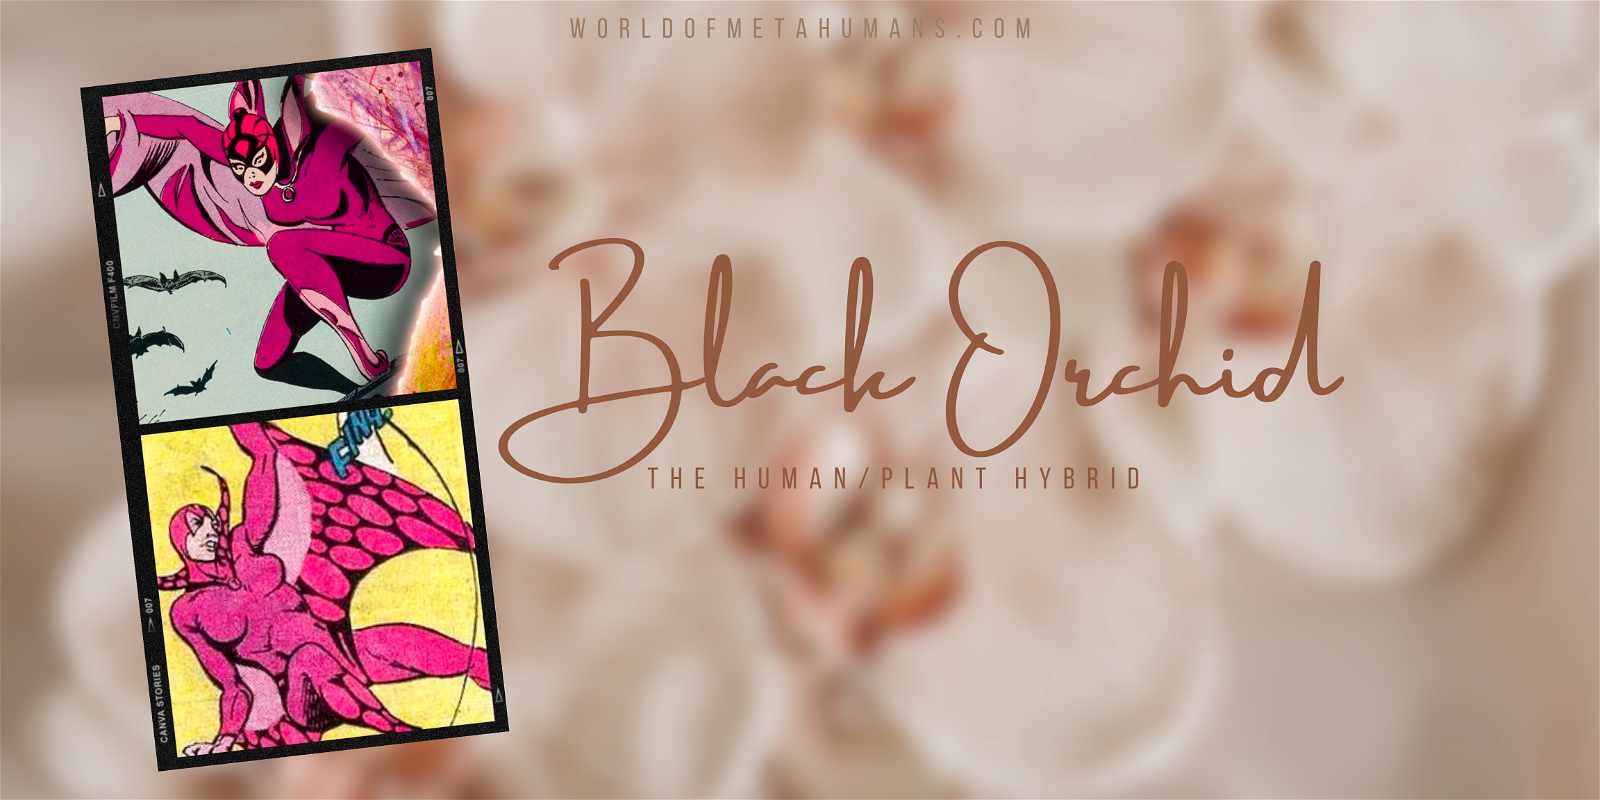 Black Orchid: The Human/Plant Hybrid